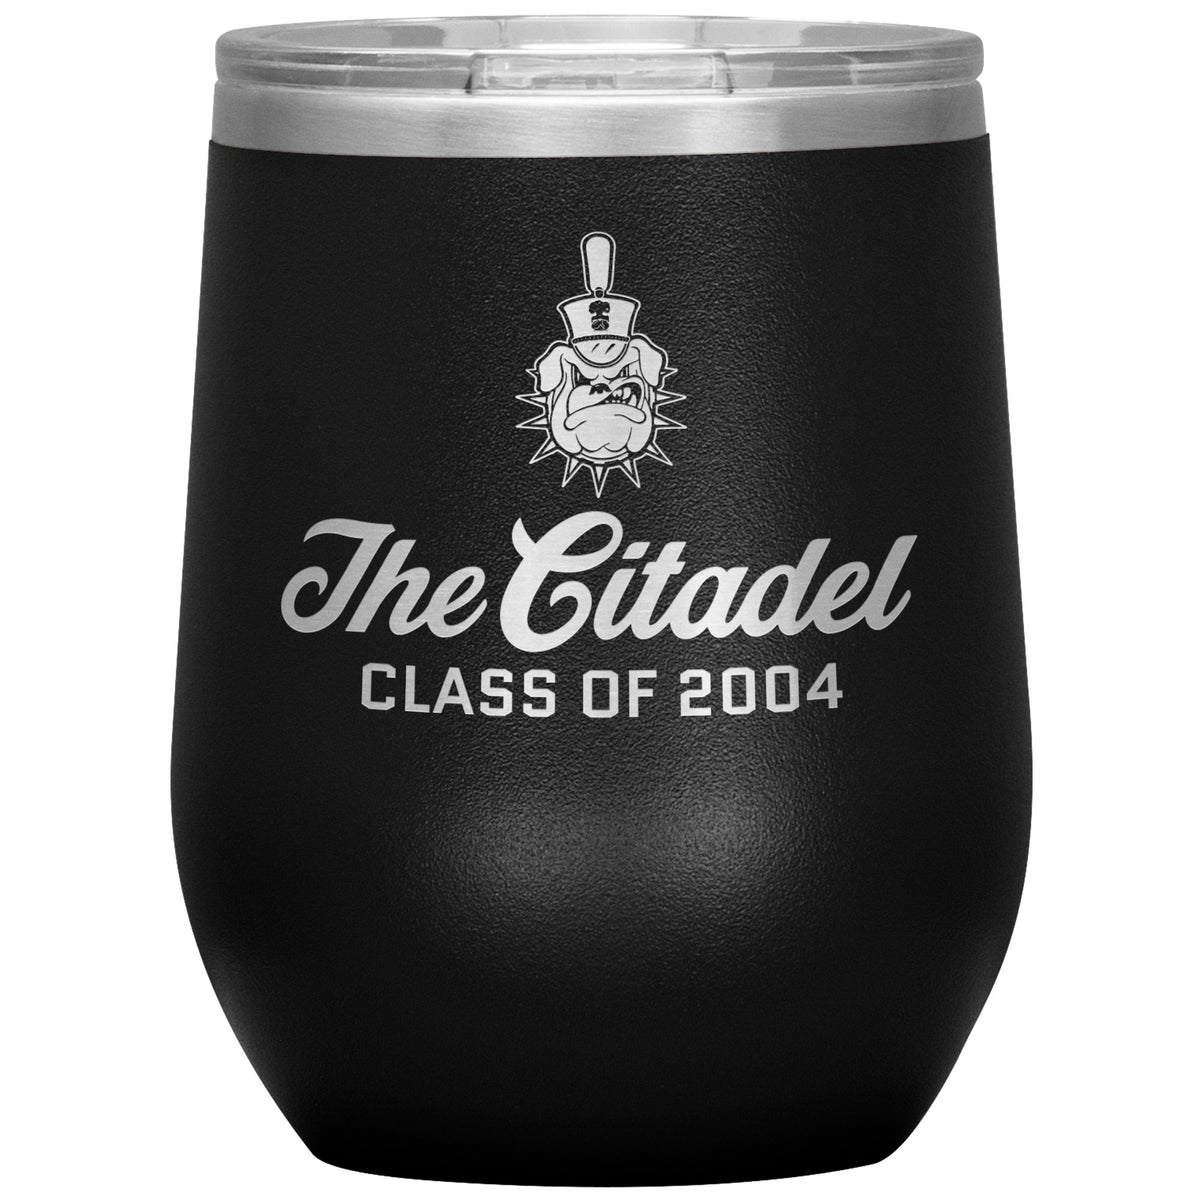 The Citadel Spike, Class of 2004, Wine Insulated Tumbler - 12oz